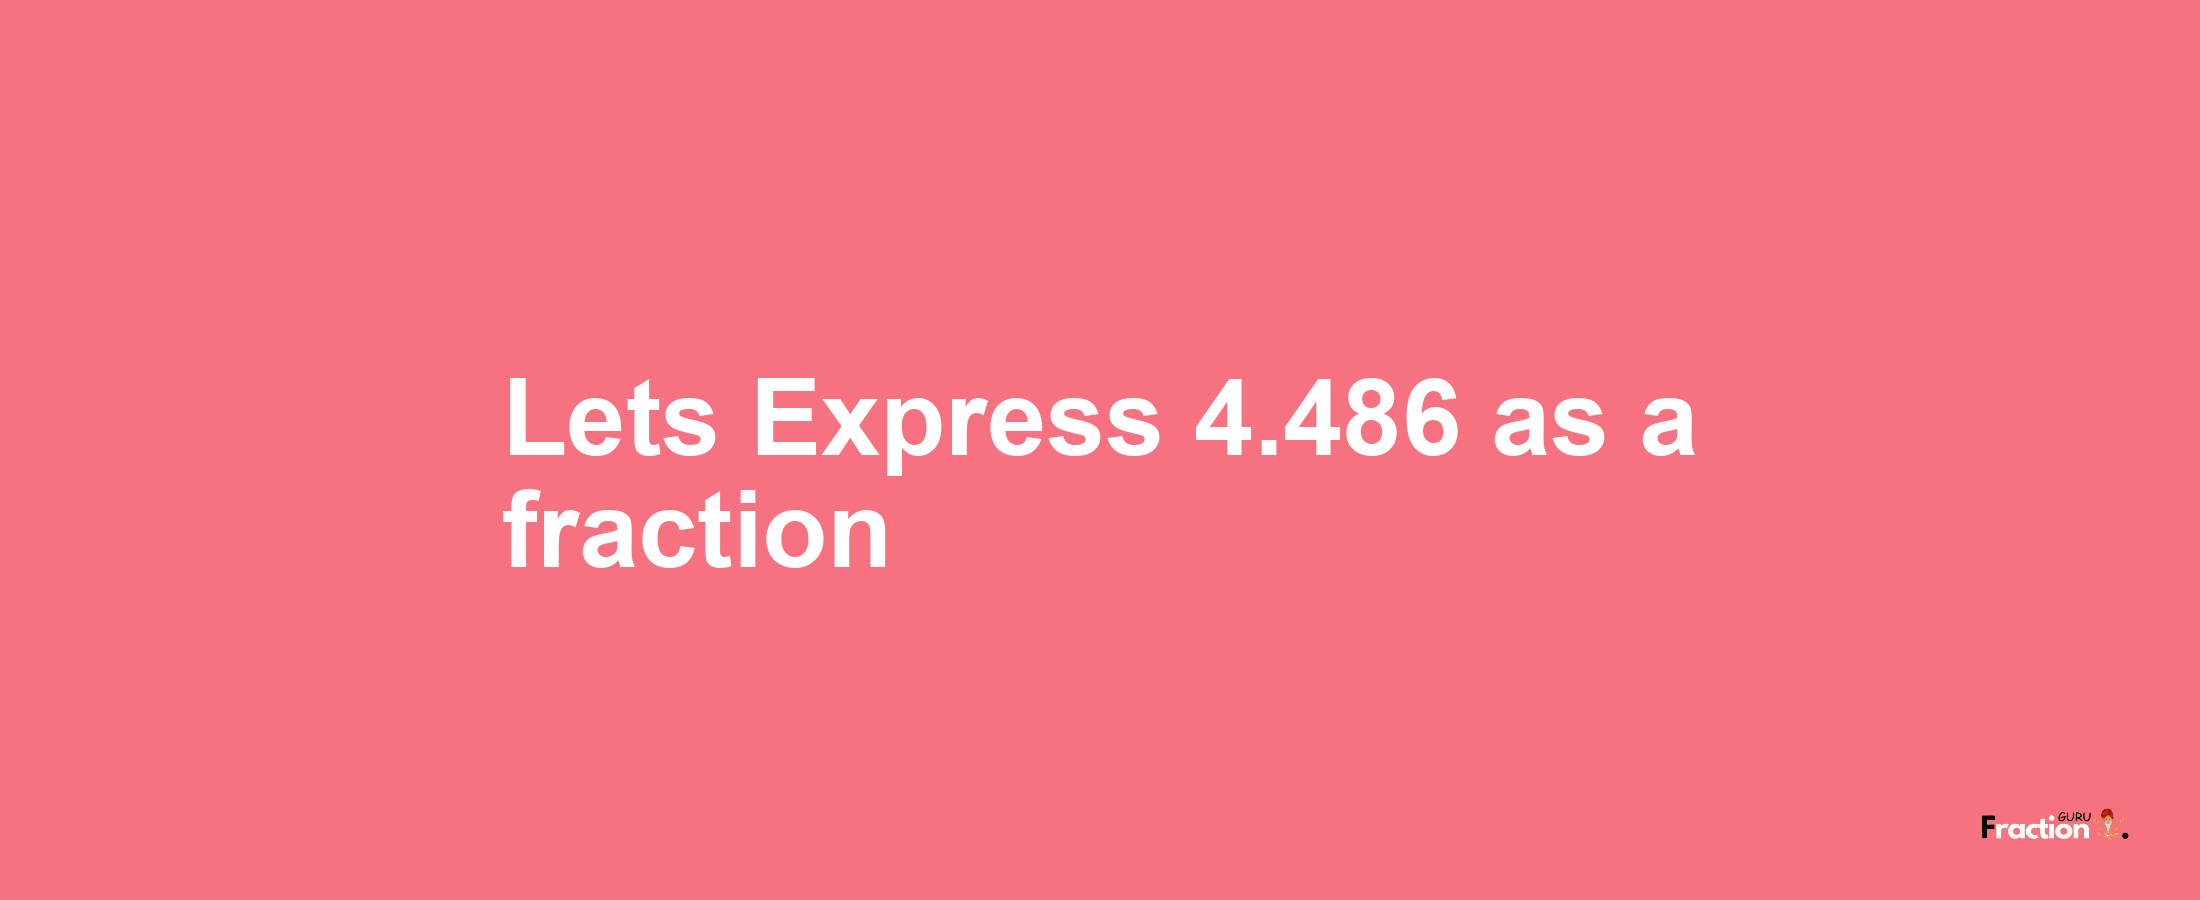 Lets Express 4.486 as afraction